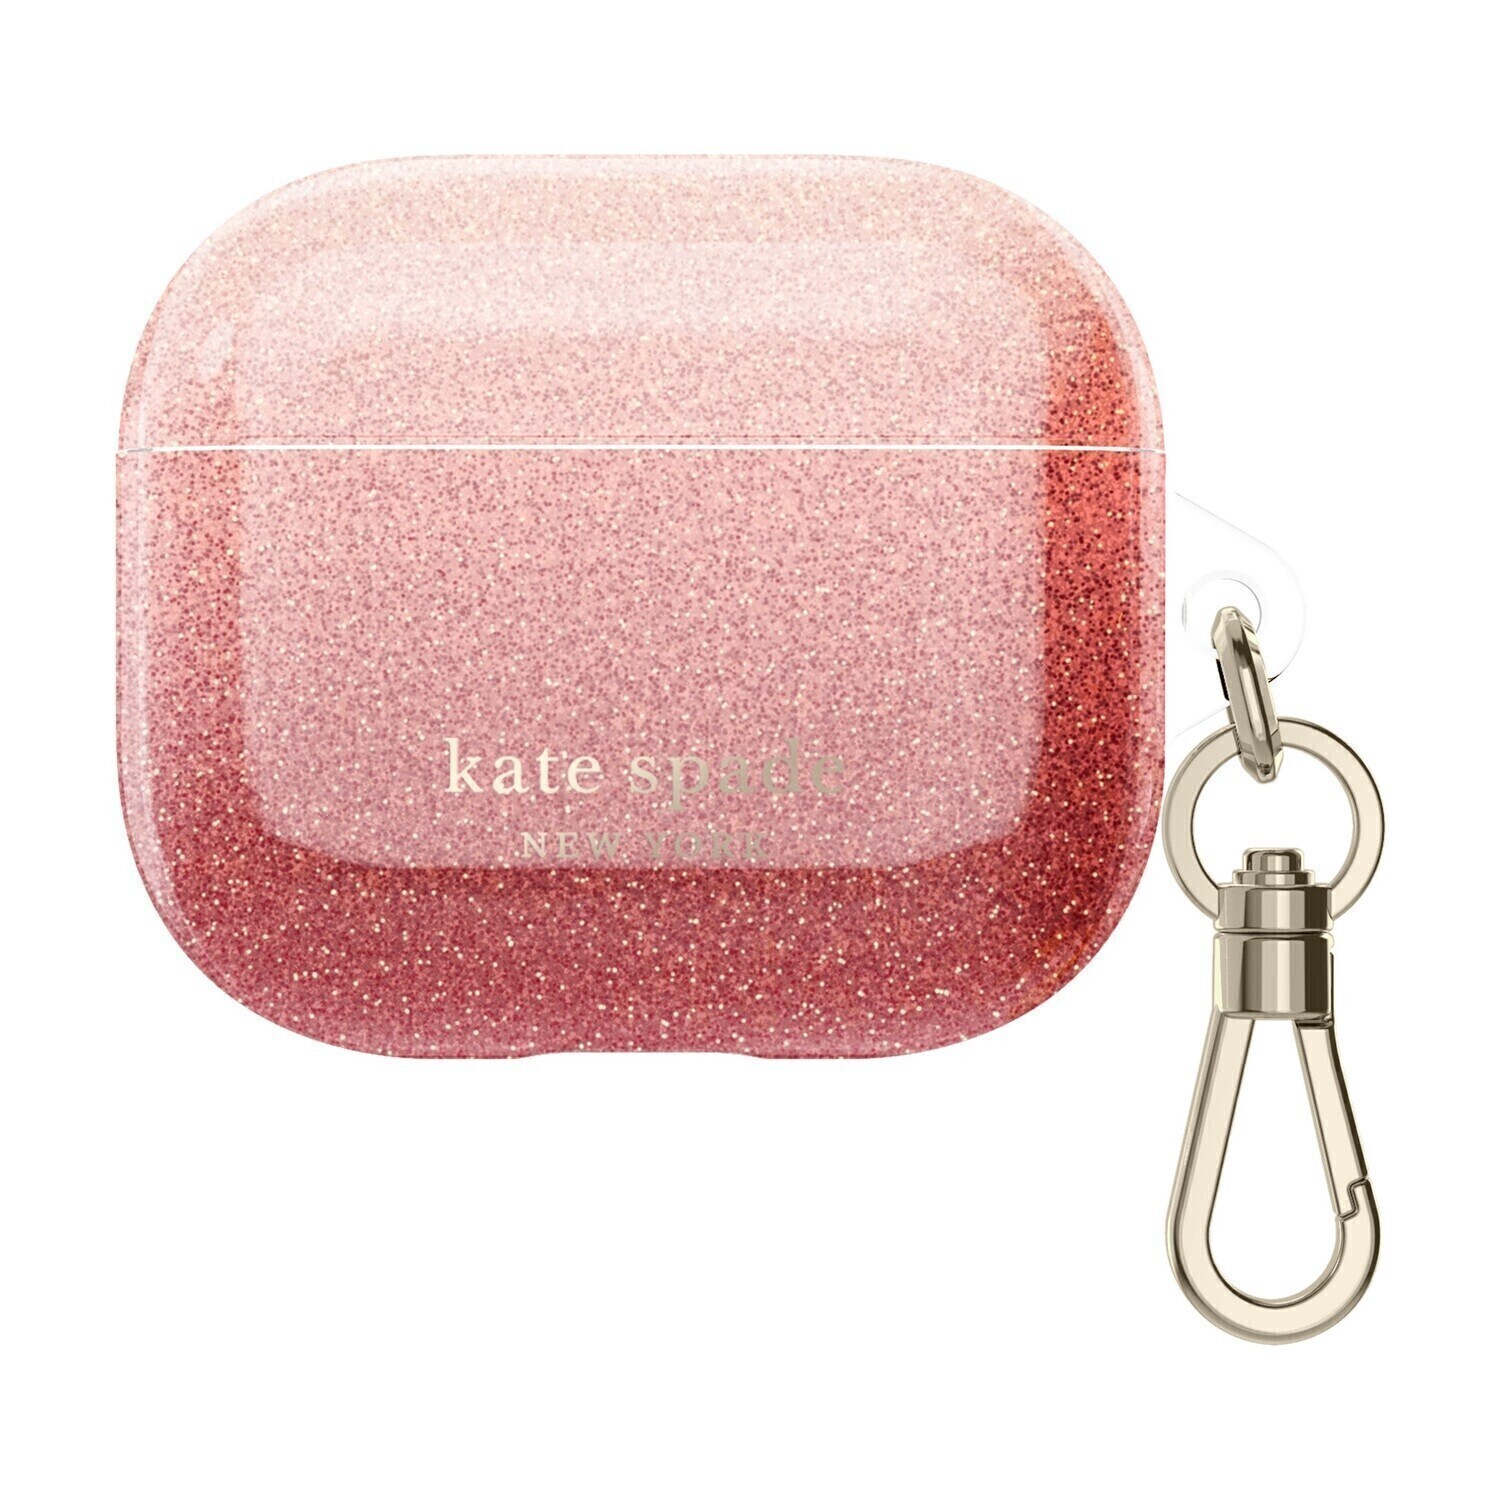 Kate Spade AirPods 3 Protective Case, Ombre Glitter Sunset/Pink Multi/Gold Foil Logo/Premium Gold Ha